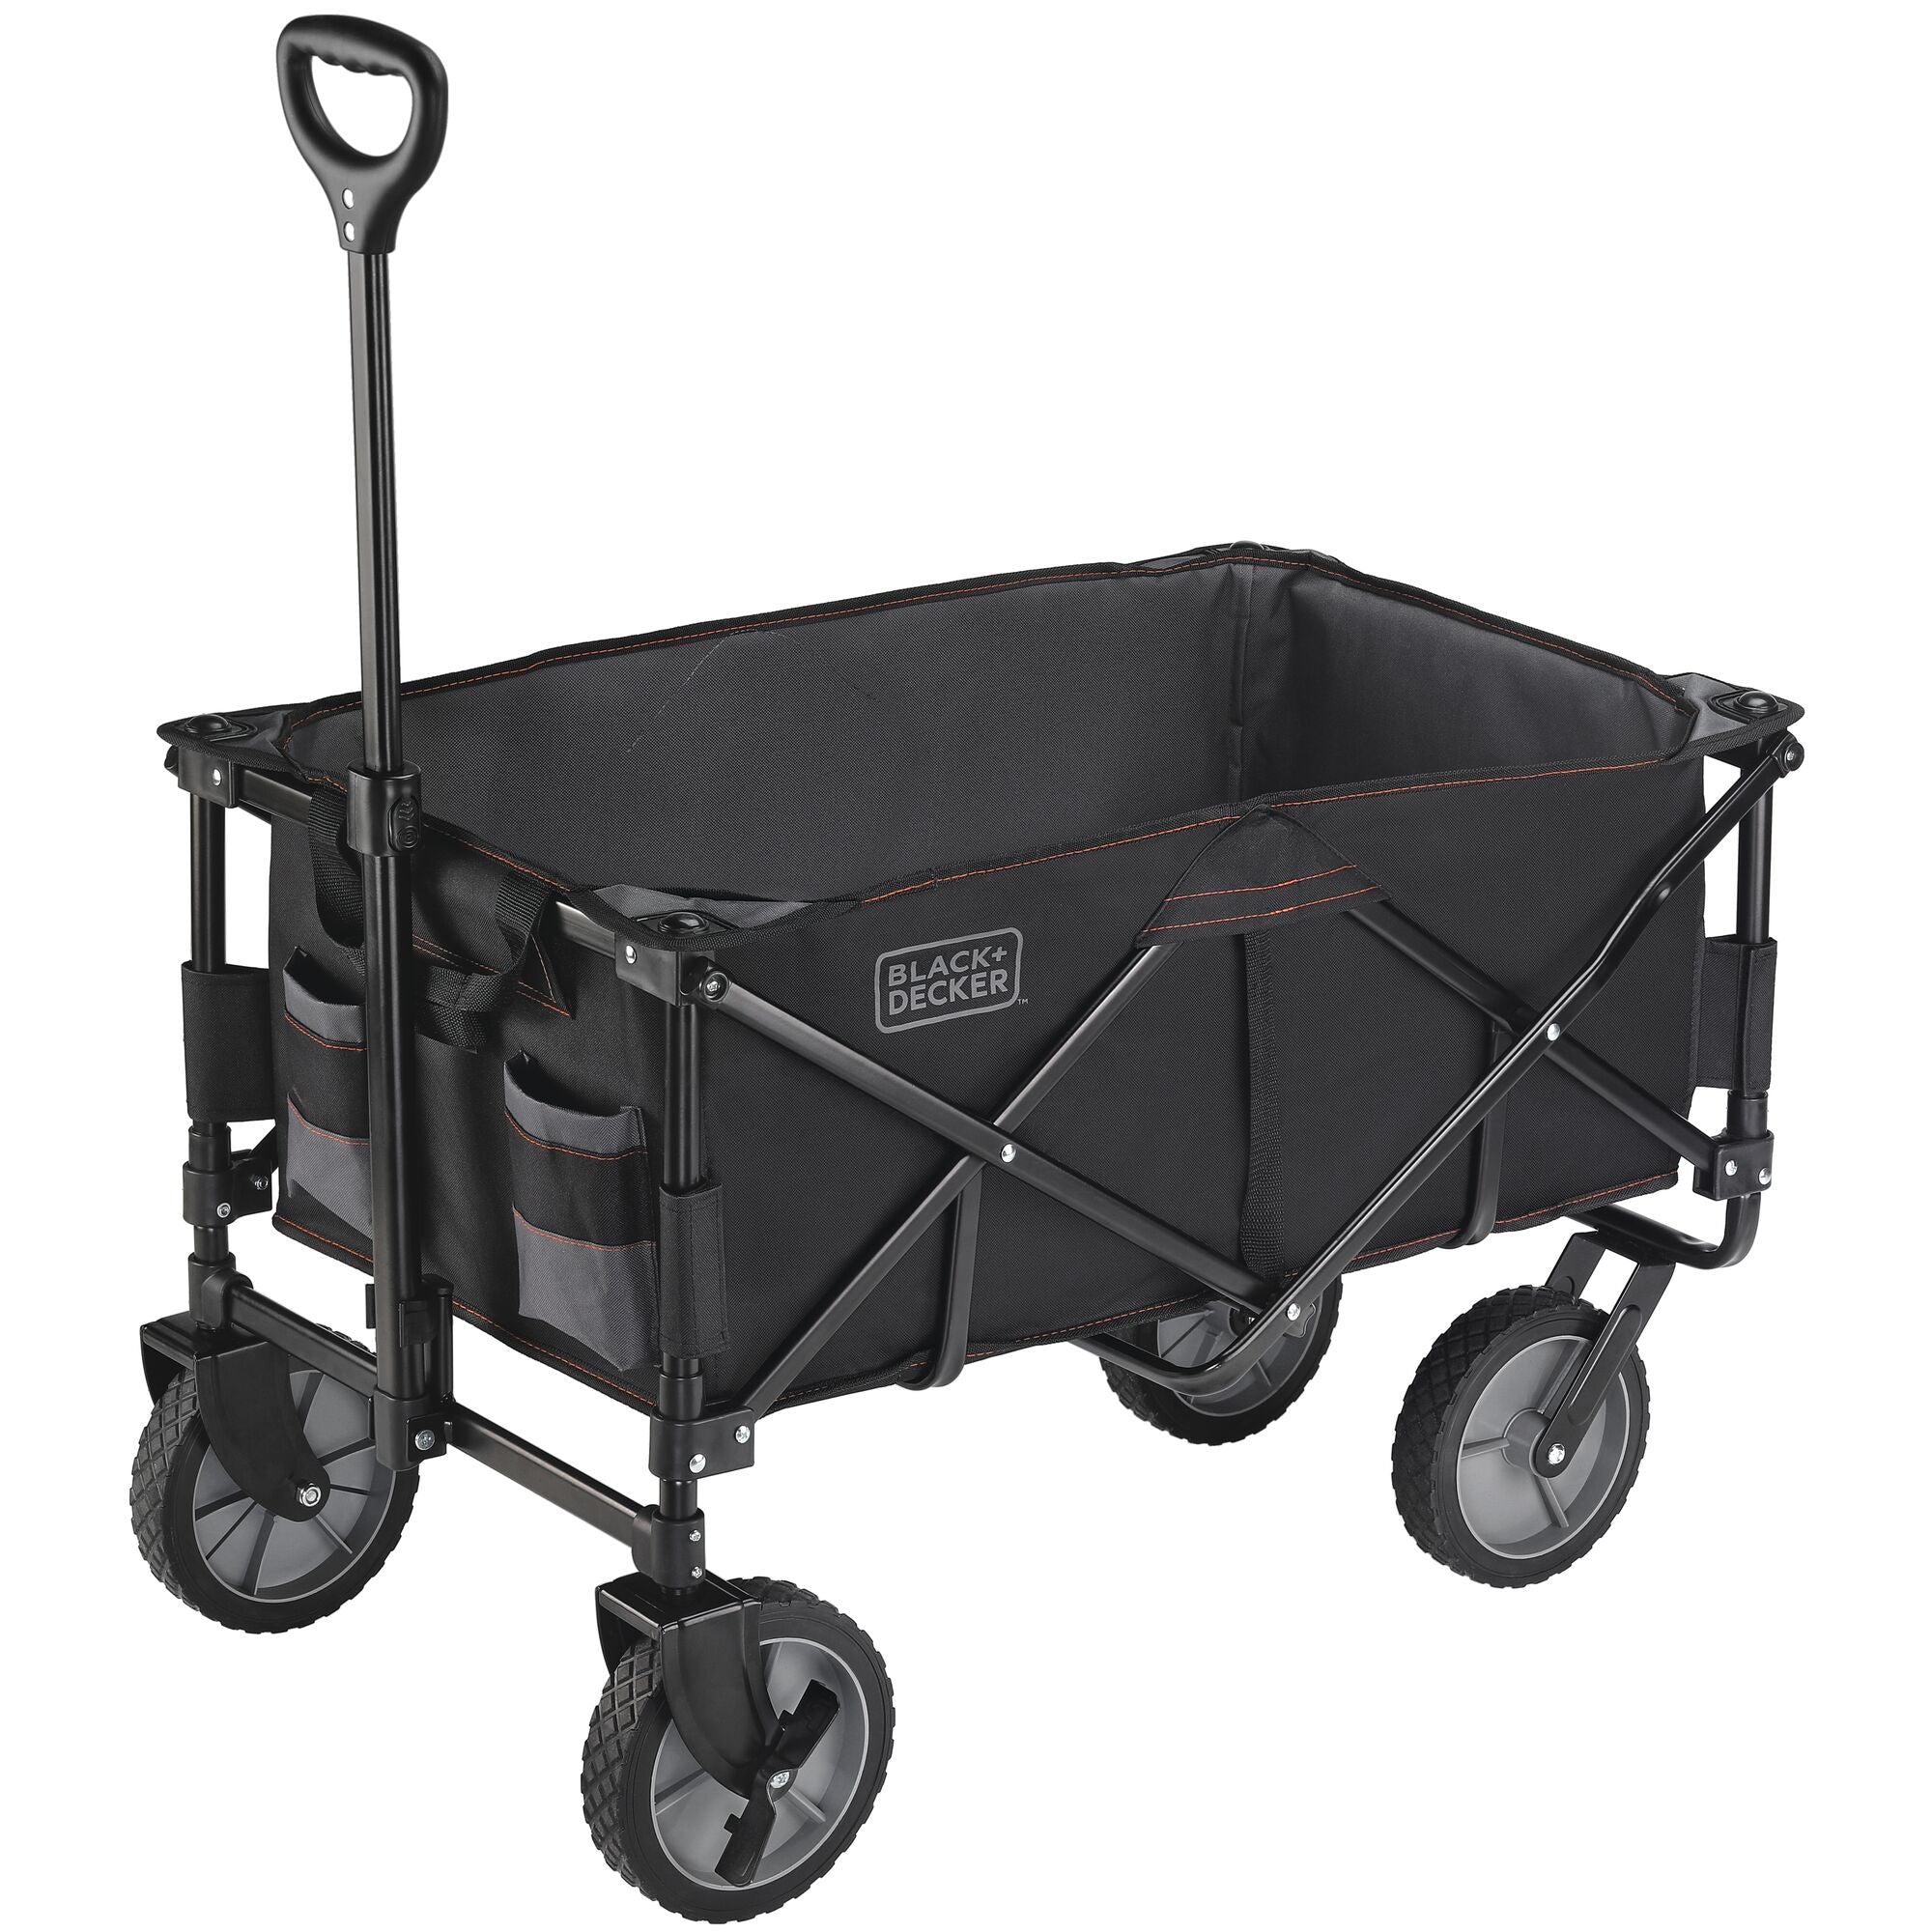 Collapsible Storage Cart, Folding Utility Wagon, Holds Up To 176